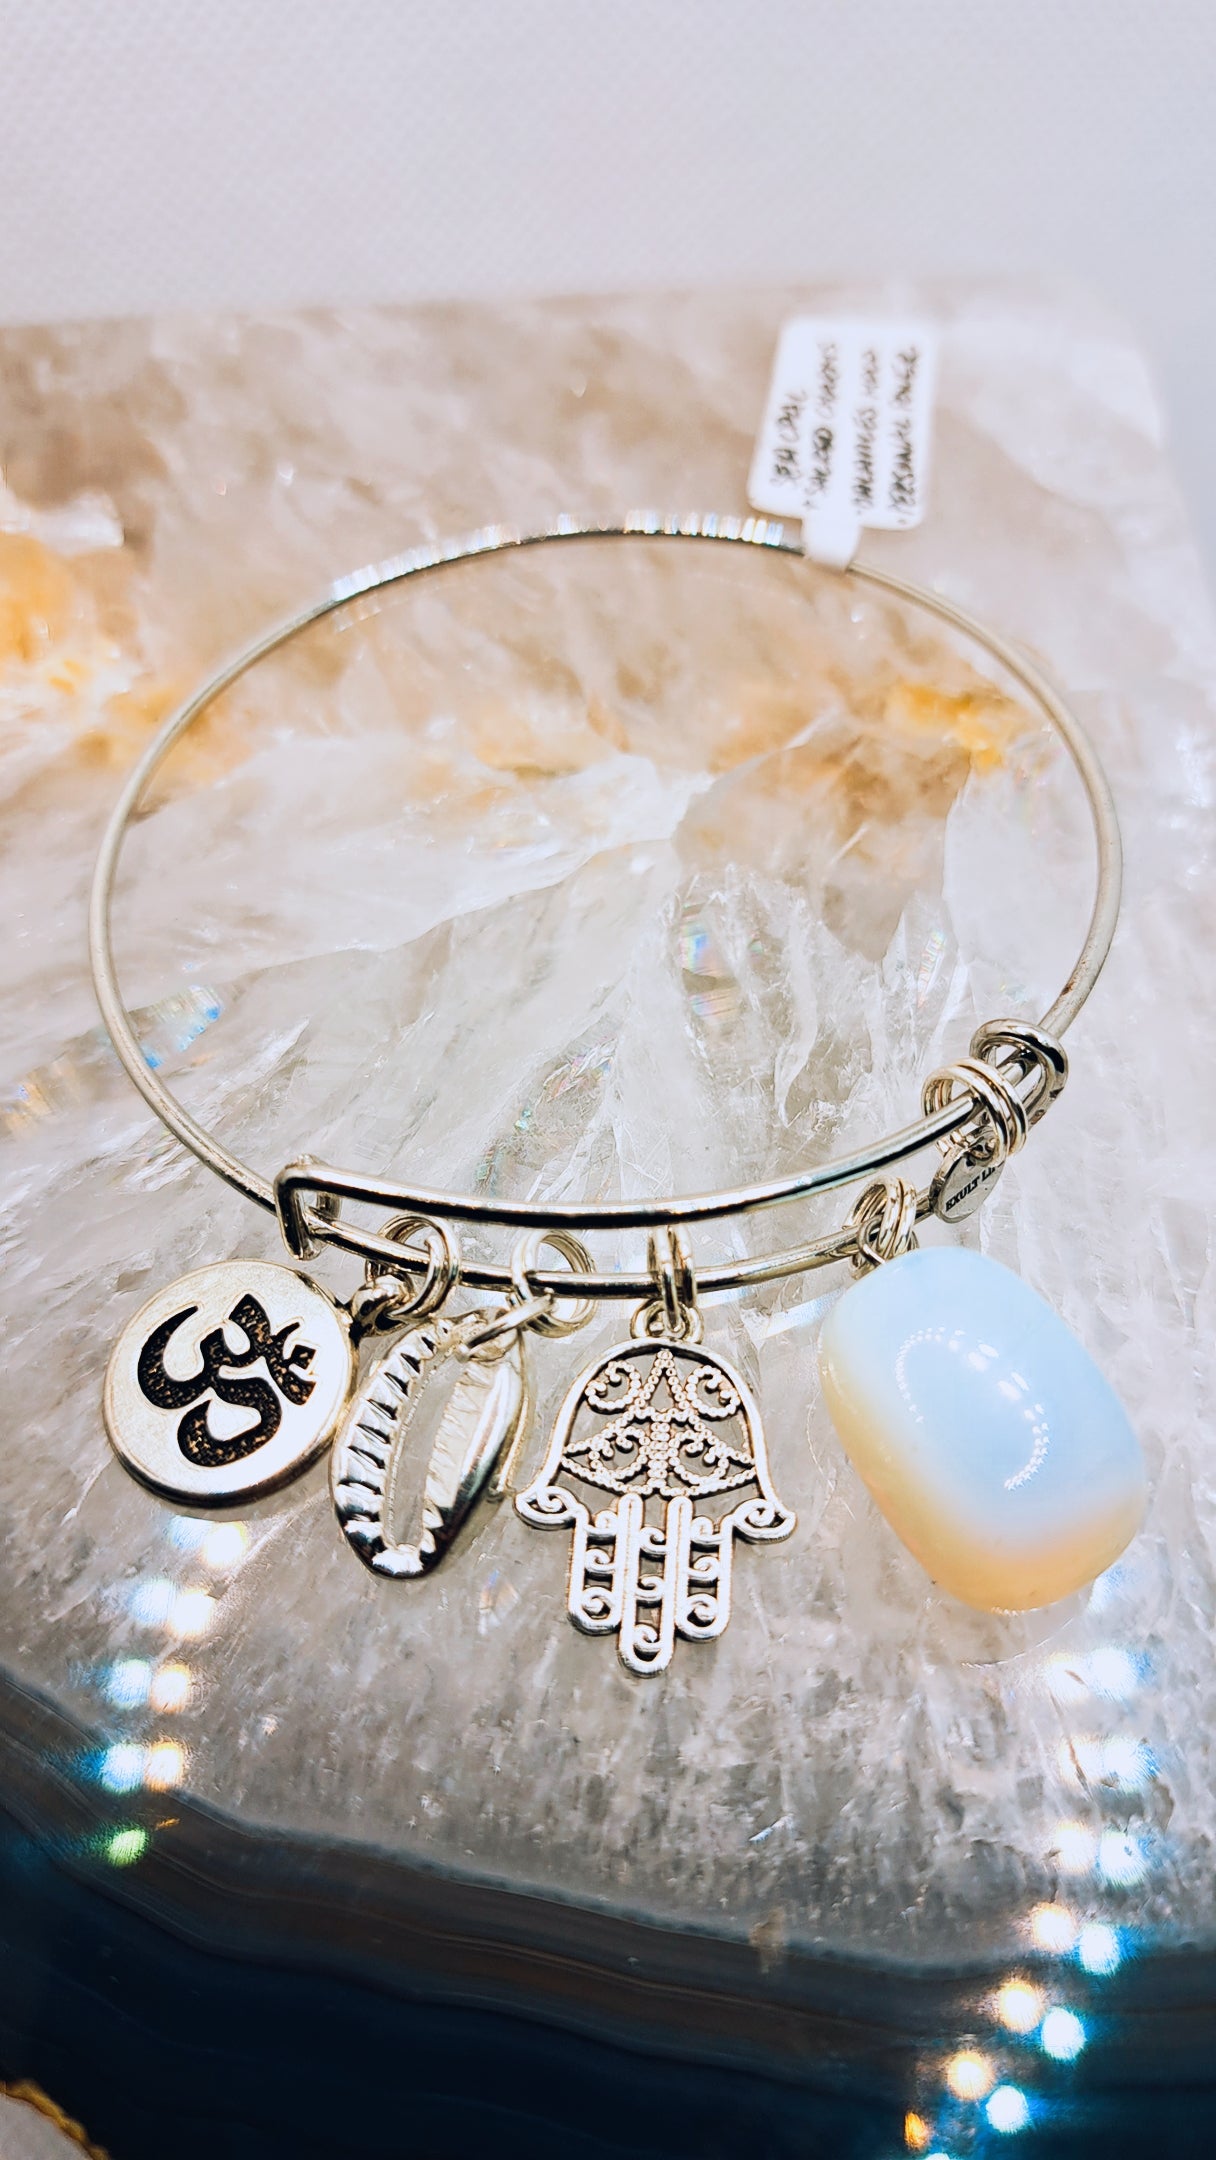 Sacred symbol charms added to enhance the bracelets meaning and energetic potential.